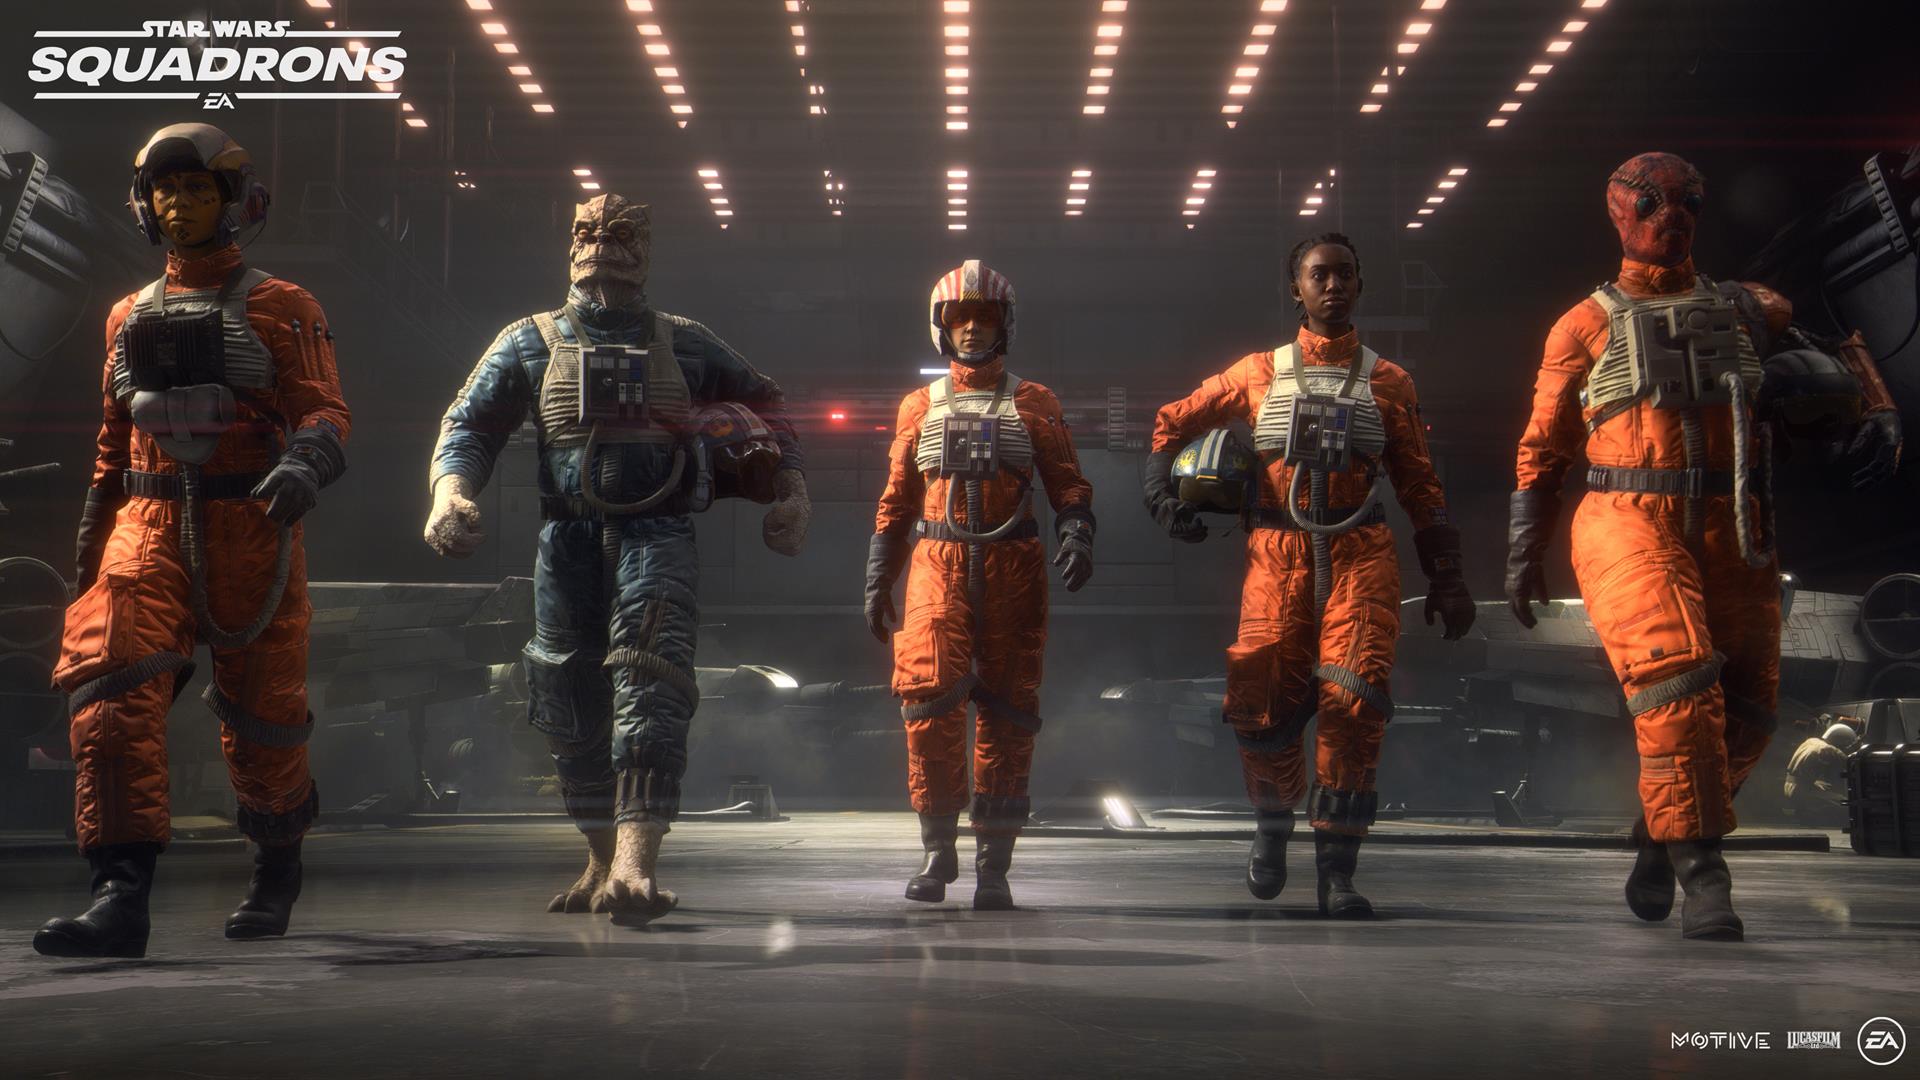 Image for Star Wars: Squadrons - here's our first look at gameplay